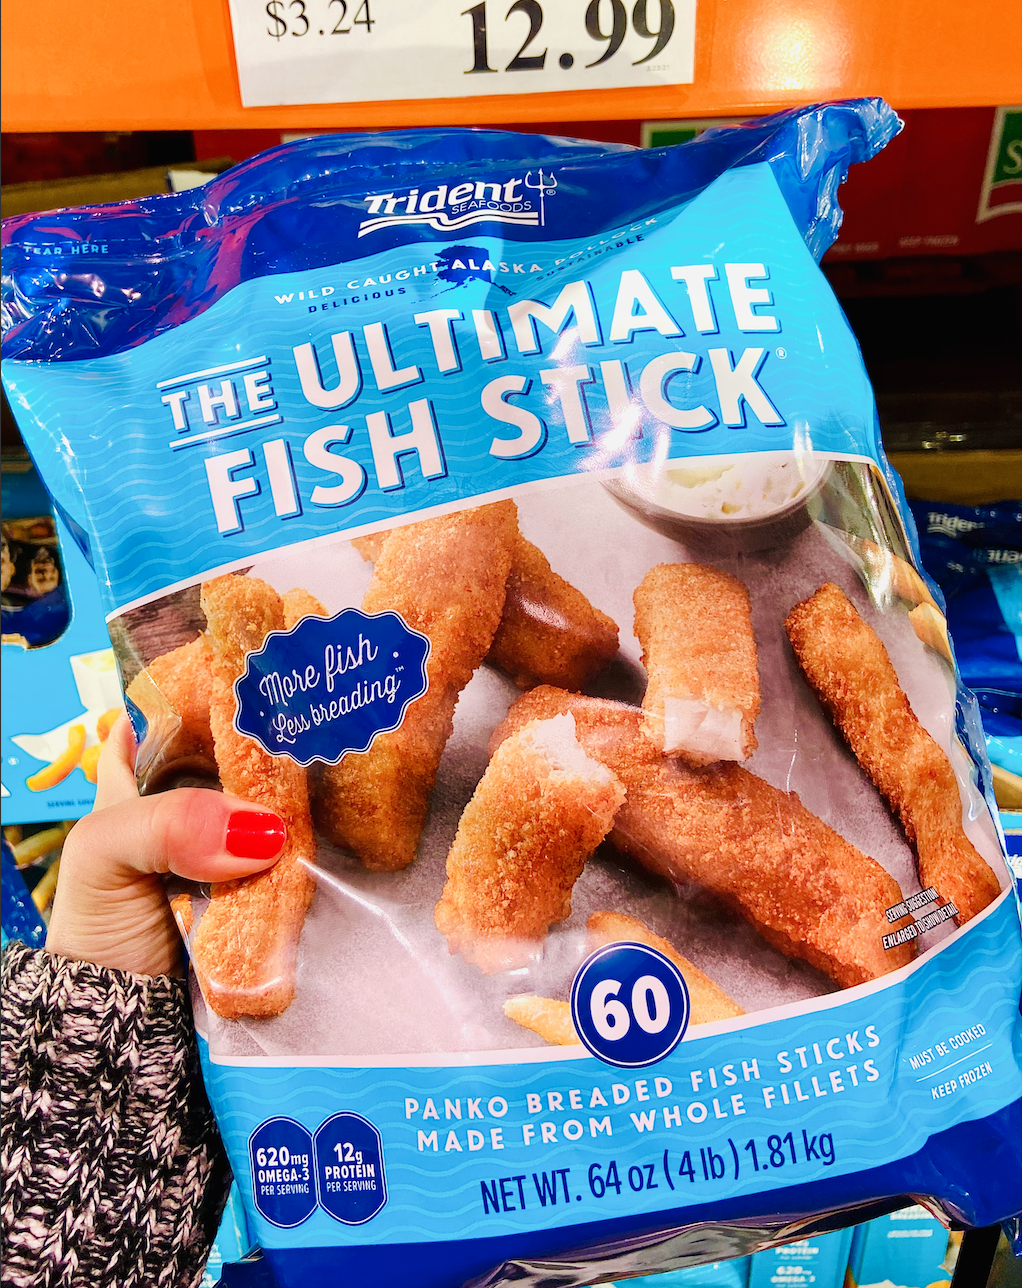 Hand holding a blue bag of fish sticks from costco